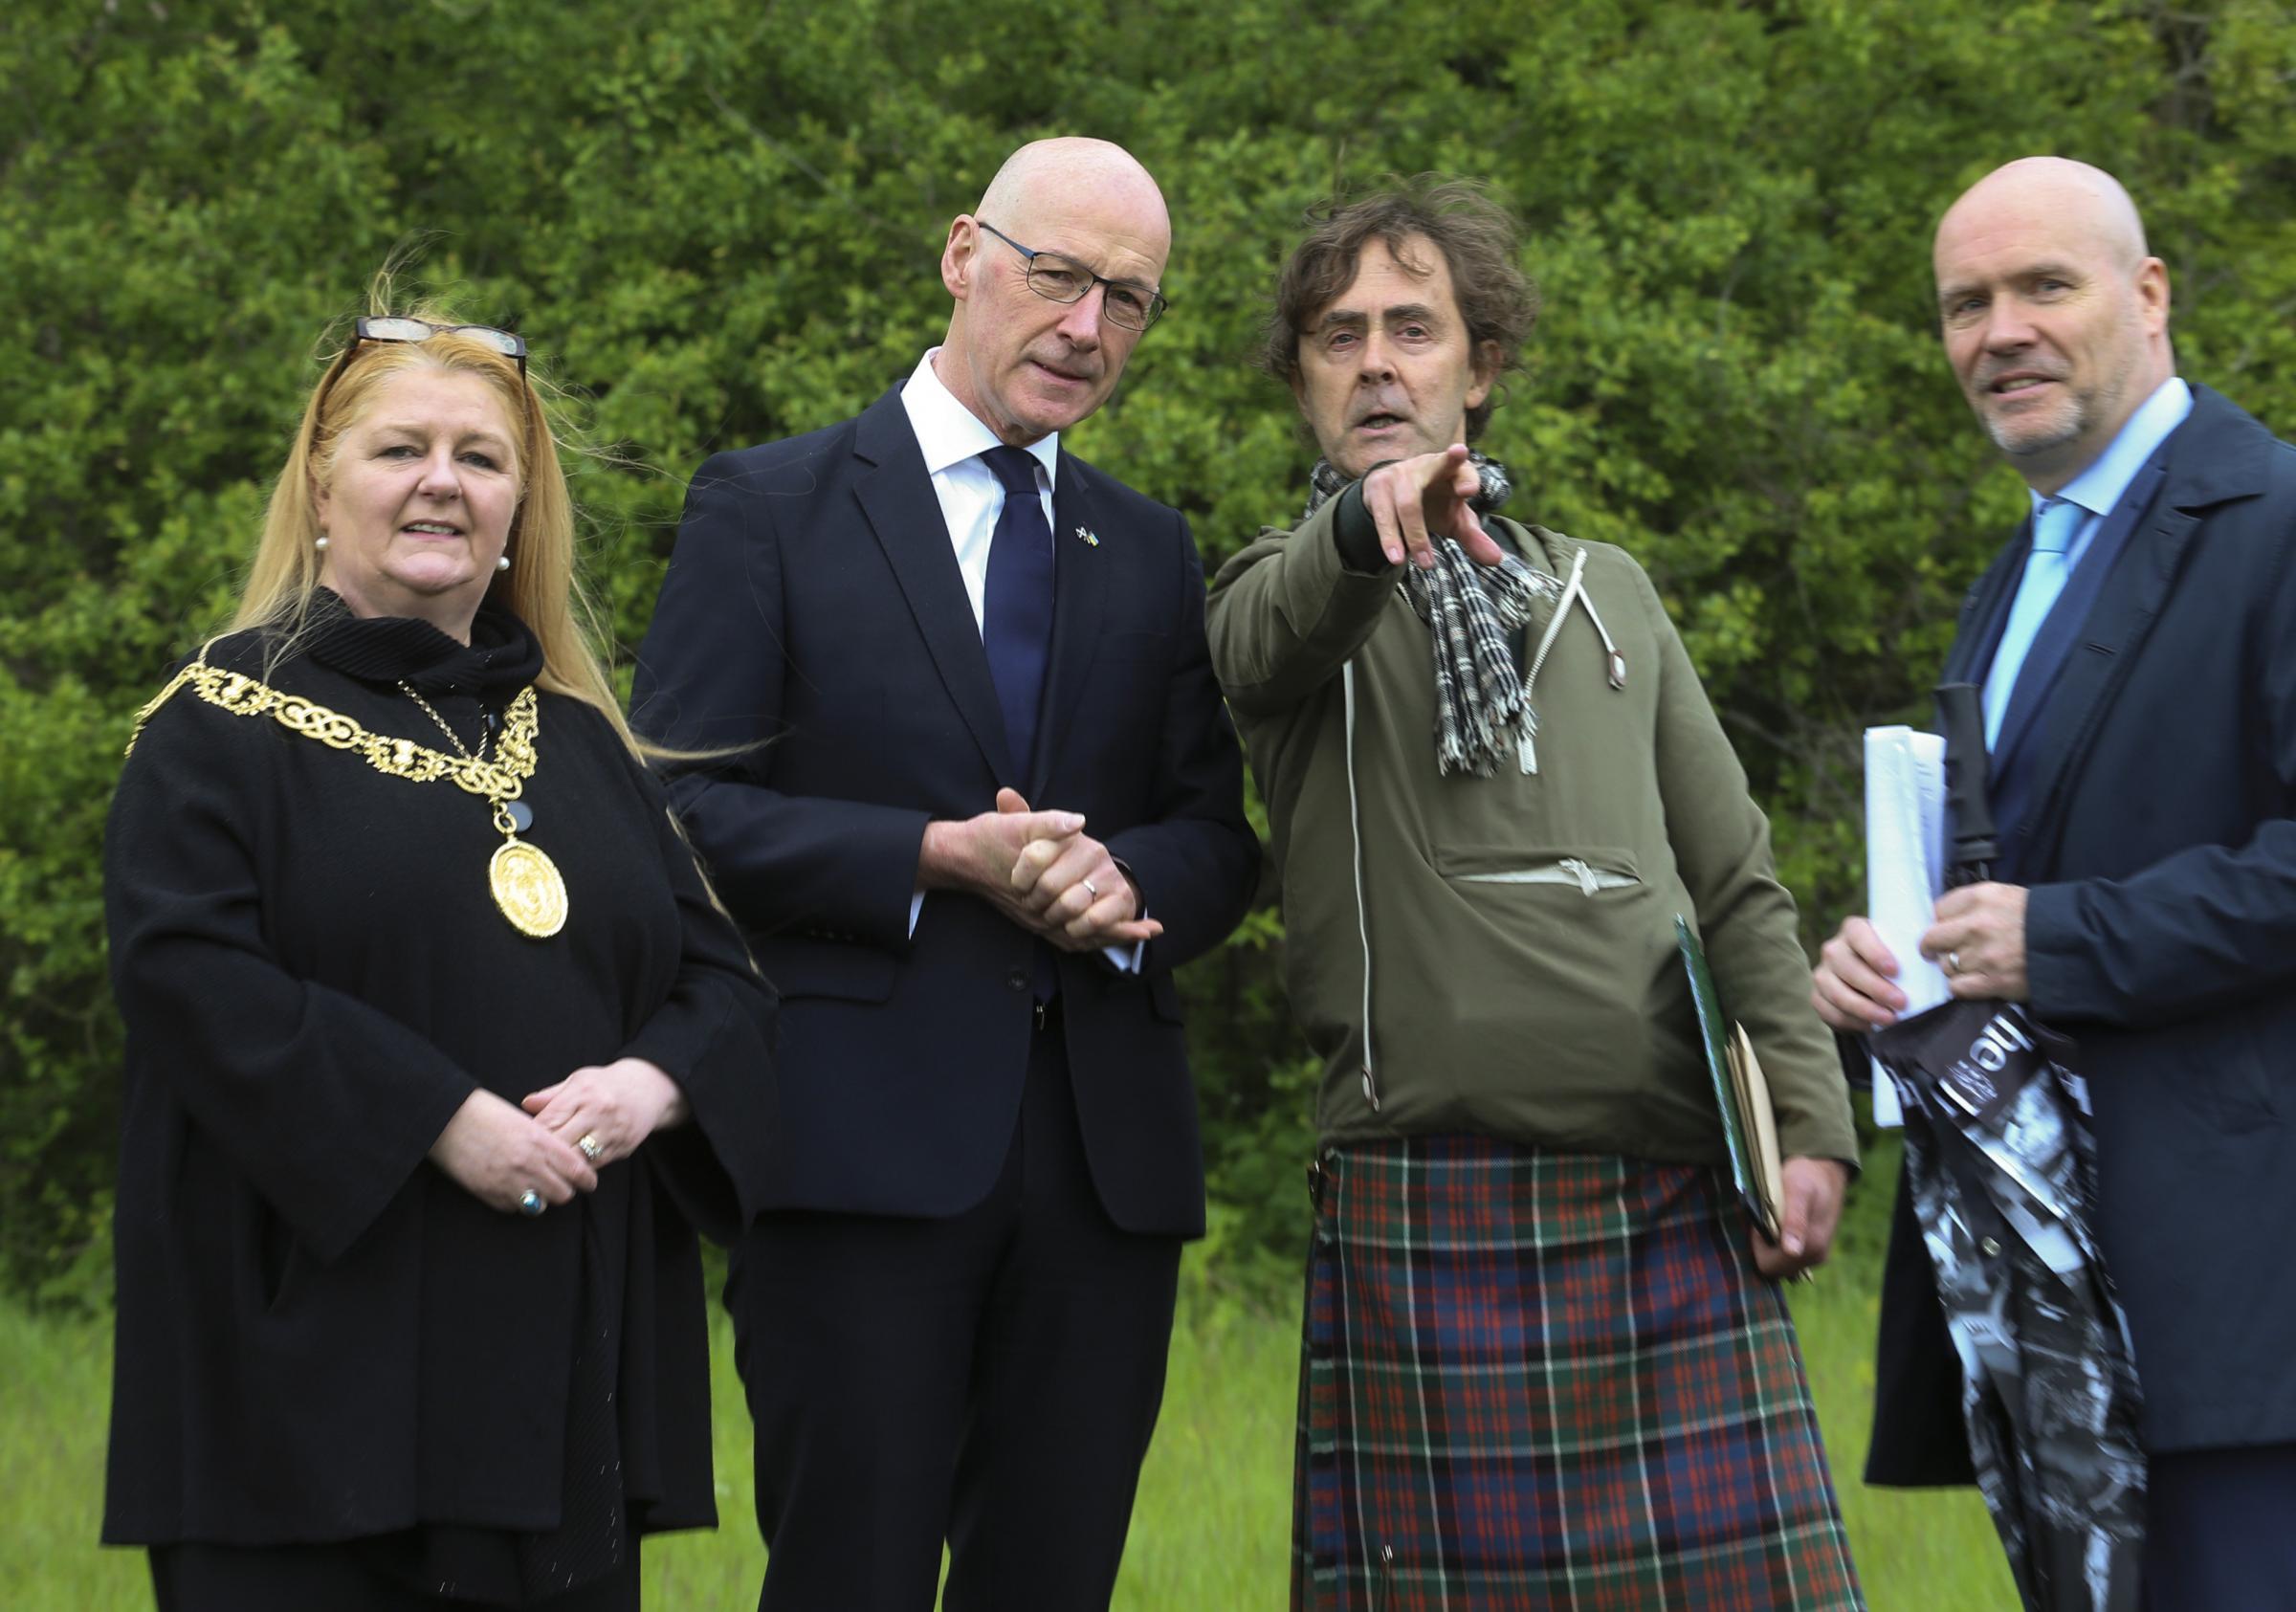 Deputy First Minister John Swinney also laid a wreath and joined families on a silent walk. From left, Glasgows Lord Provost Jacqueline McLaren, Mr Swinney, artist Alec Findlay and Donald Martin, Editor of The Herald. Photo Gordon Terris.